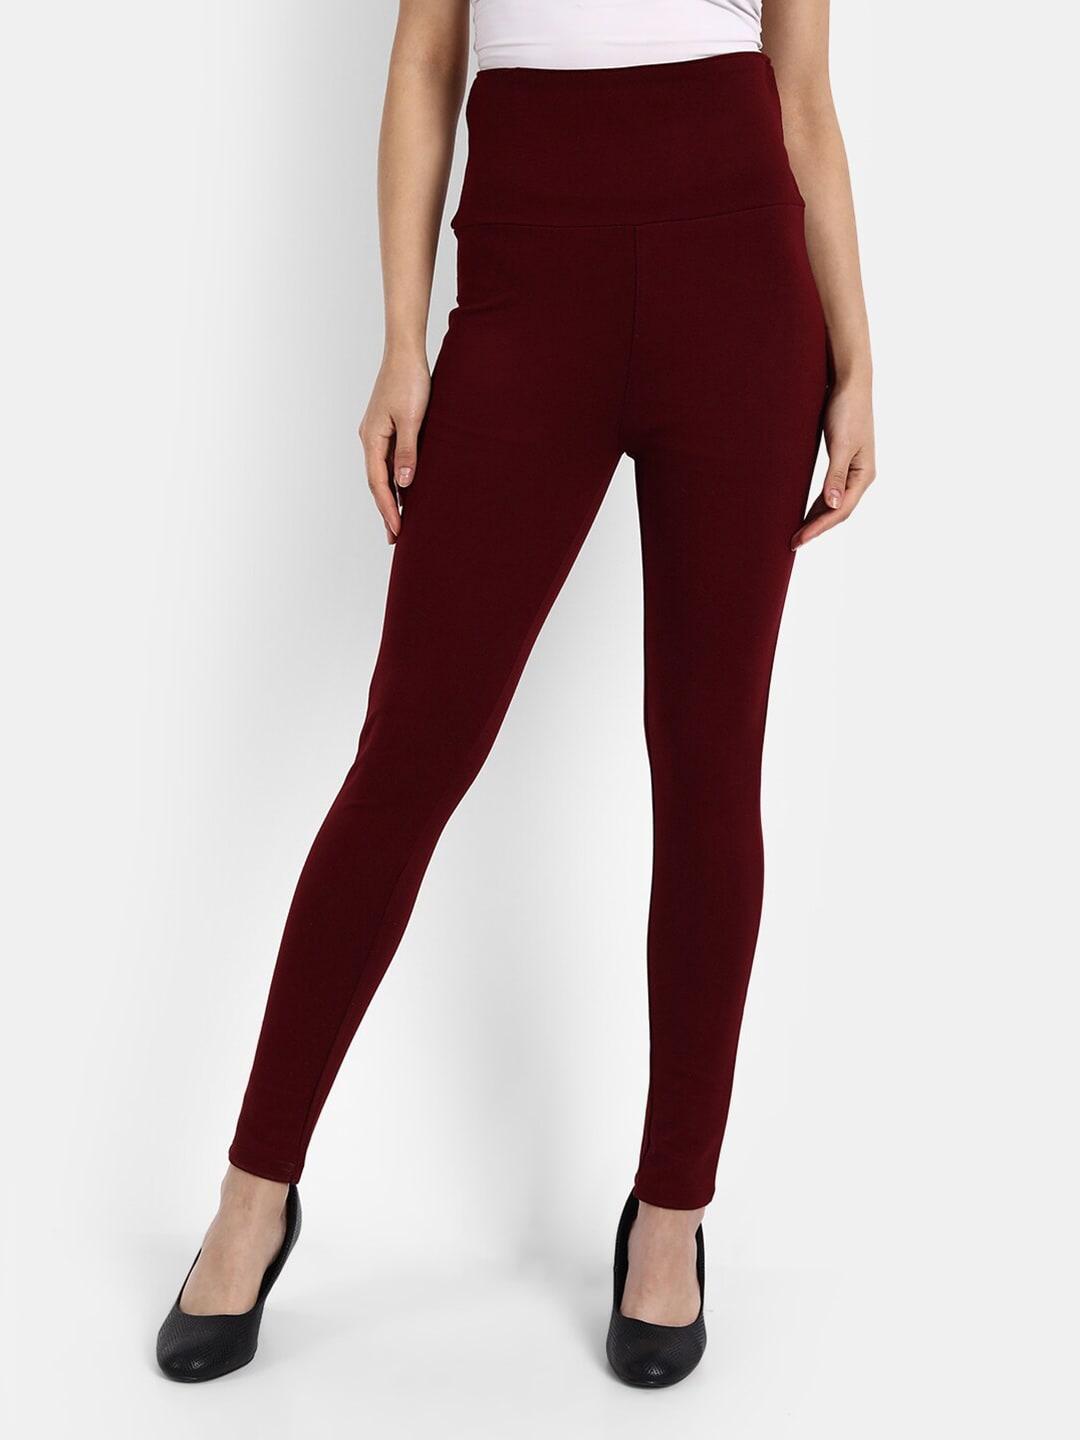 Next One Women Maroon Solid Skinny-Fit Jeggings